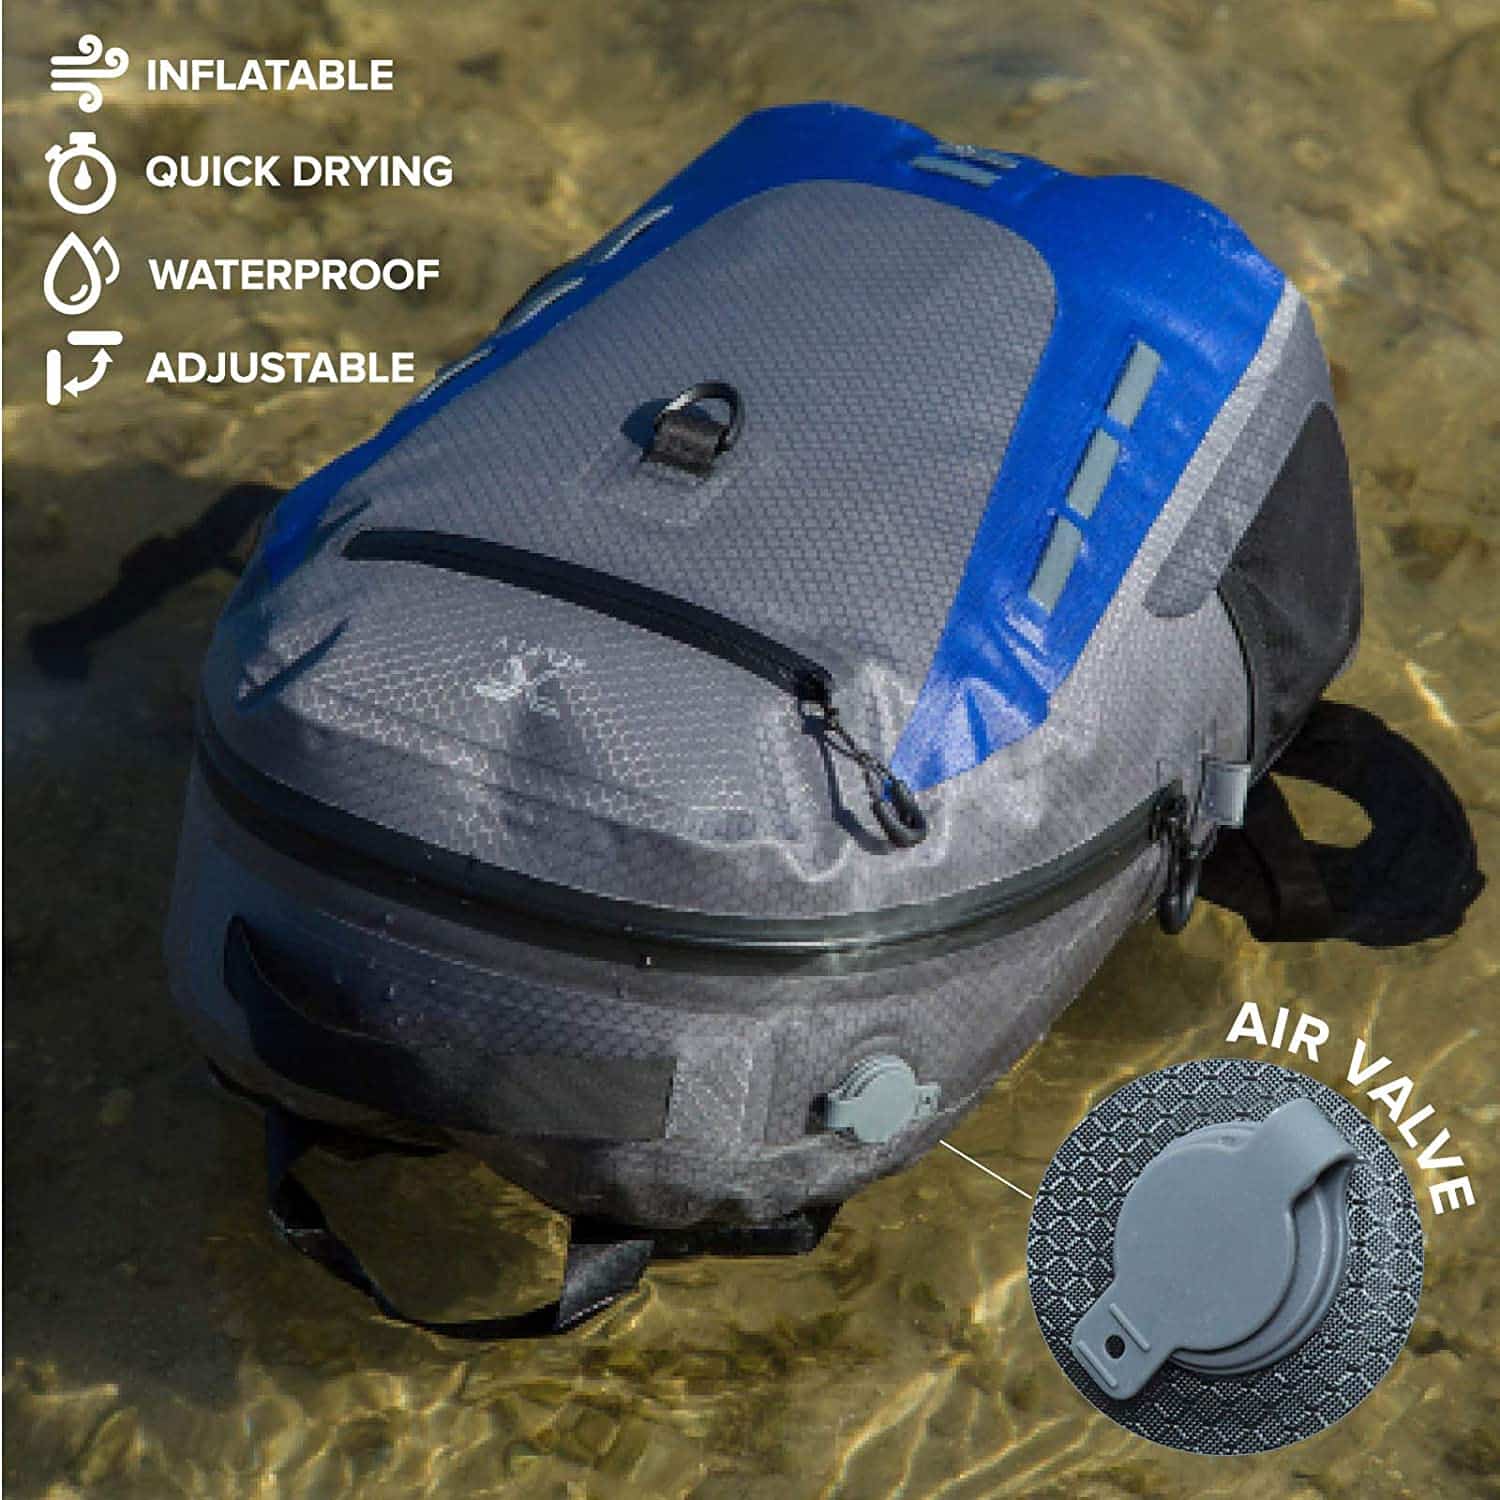 Submersible Backpack for a Boating Fanatic